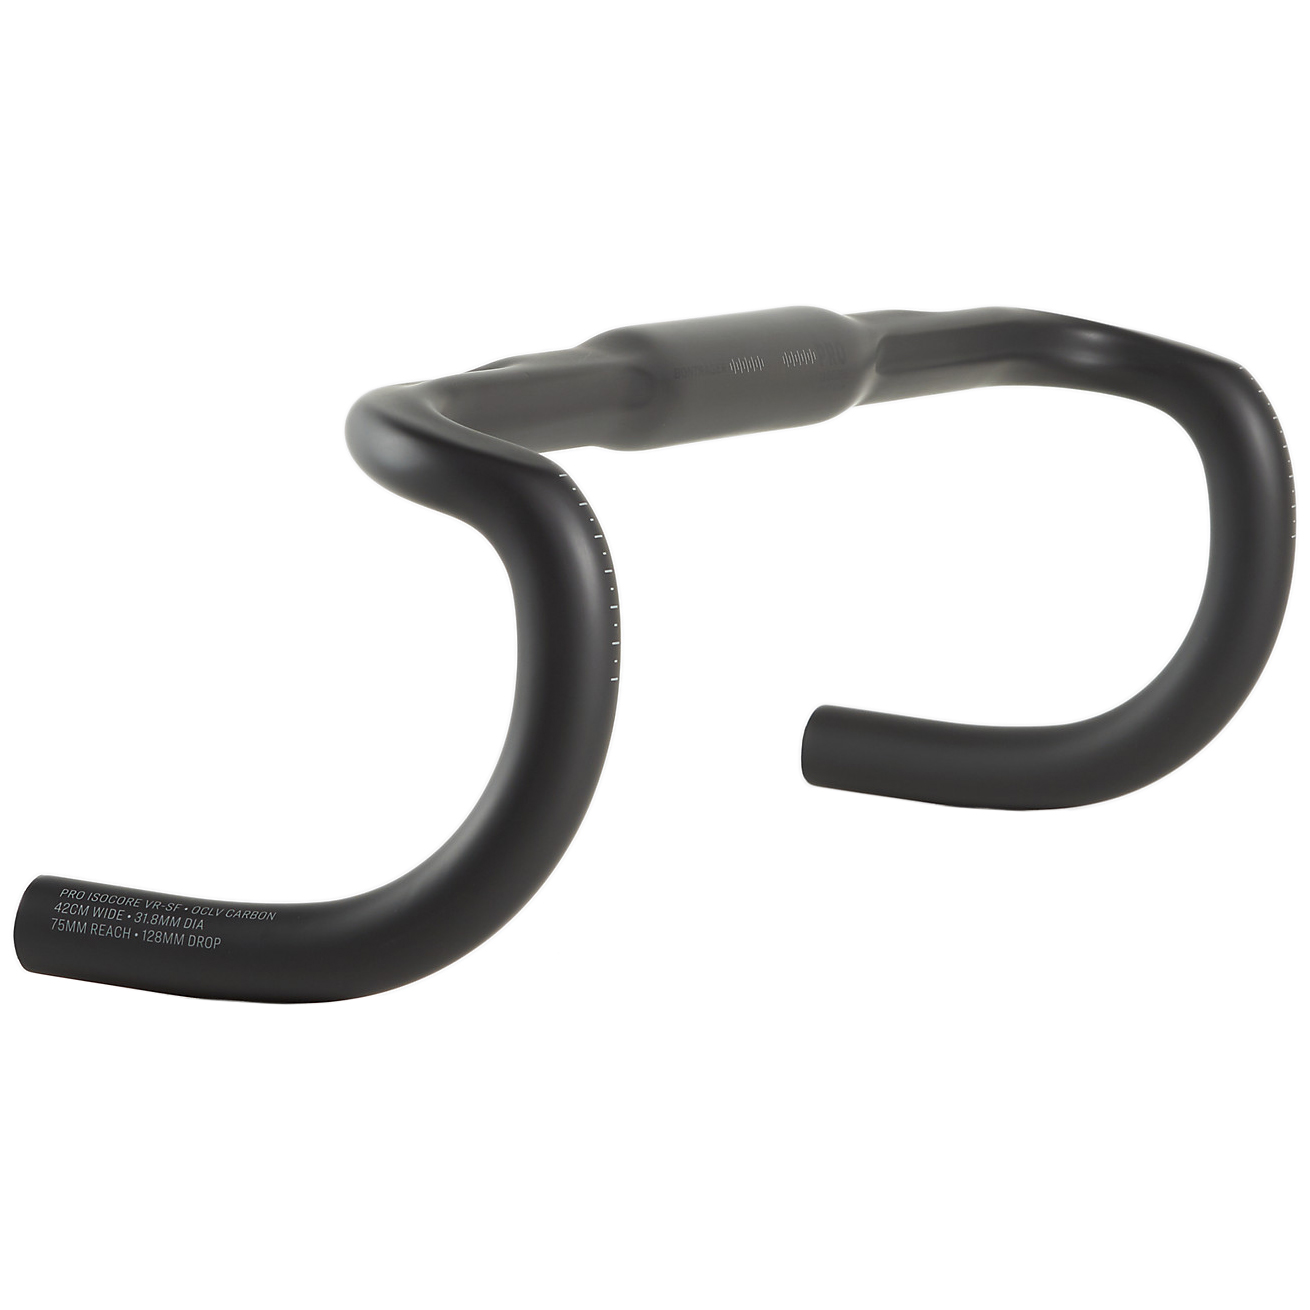 Picture of Bontrager Pro IsoCore VR-SF Road Bar - Black - 2nd Choice